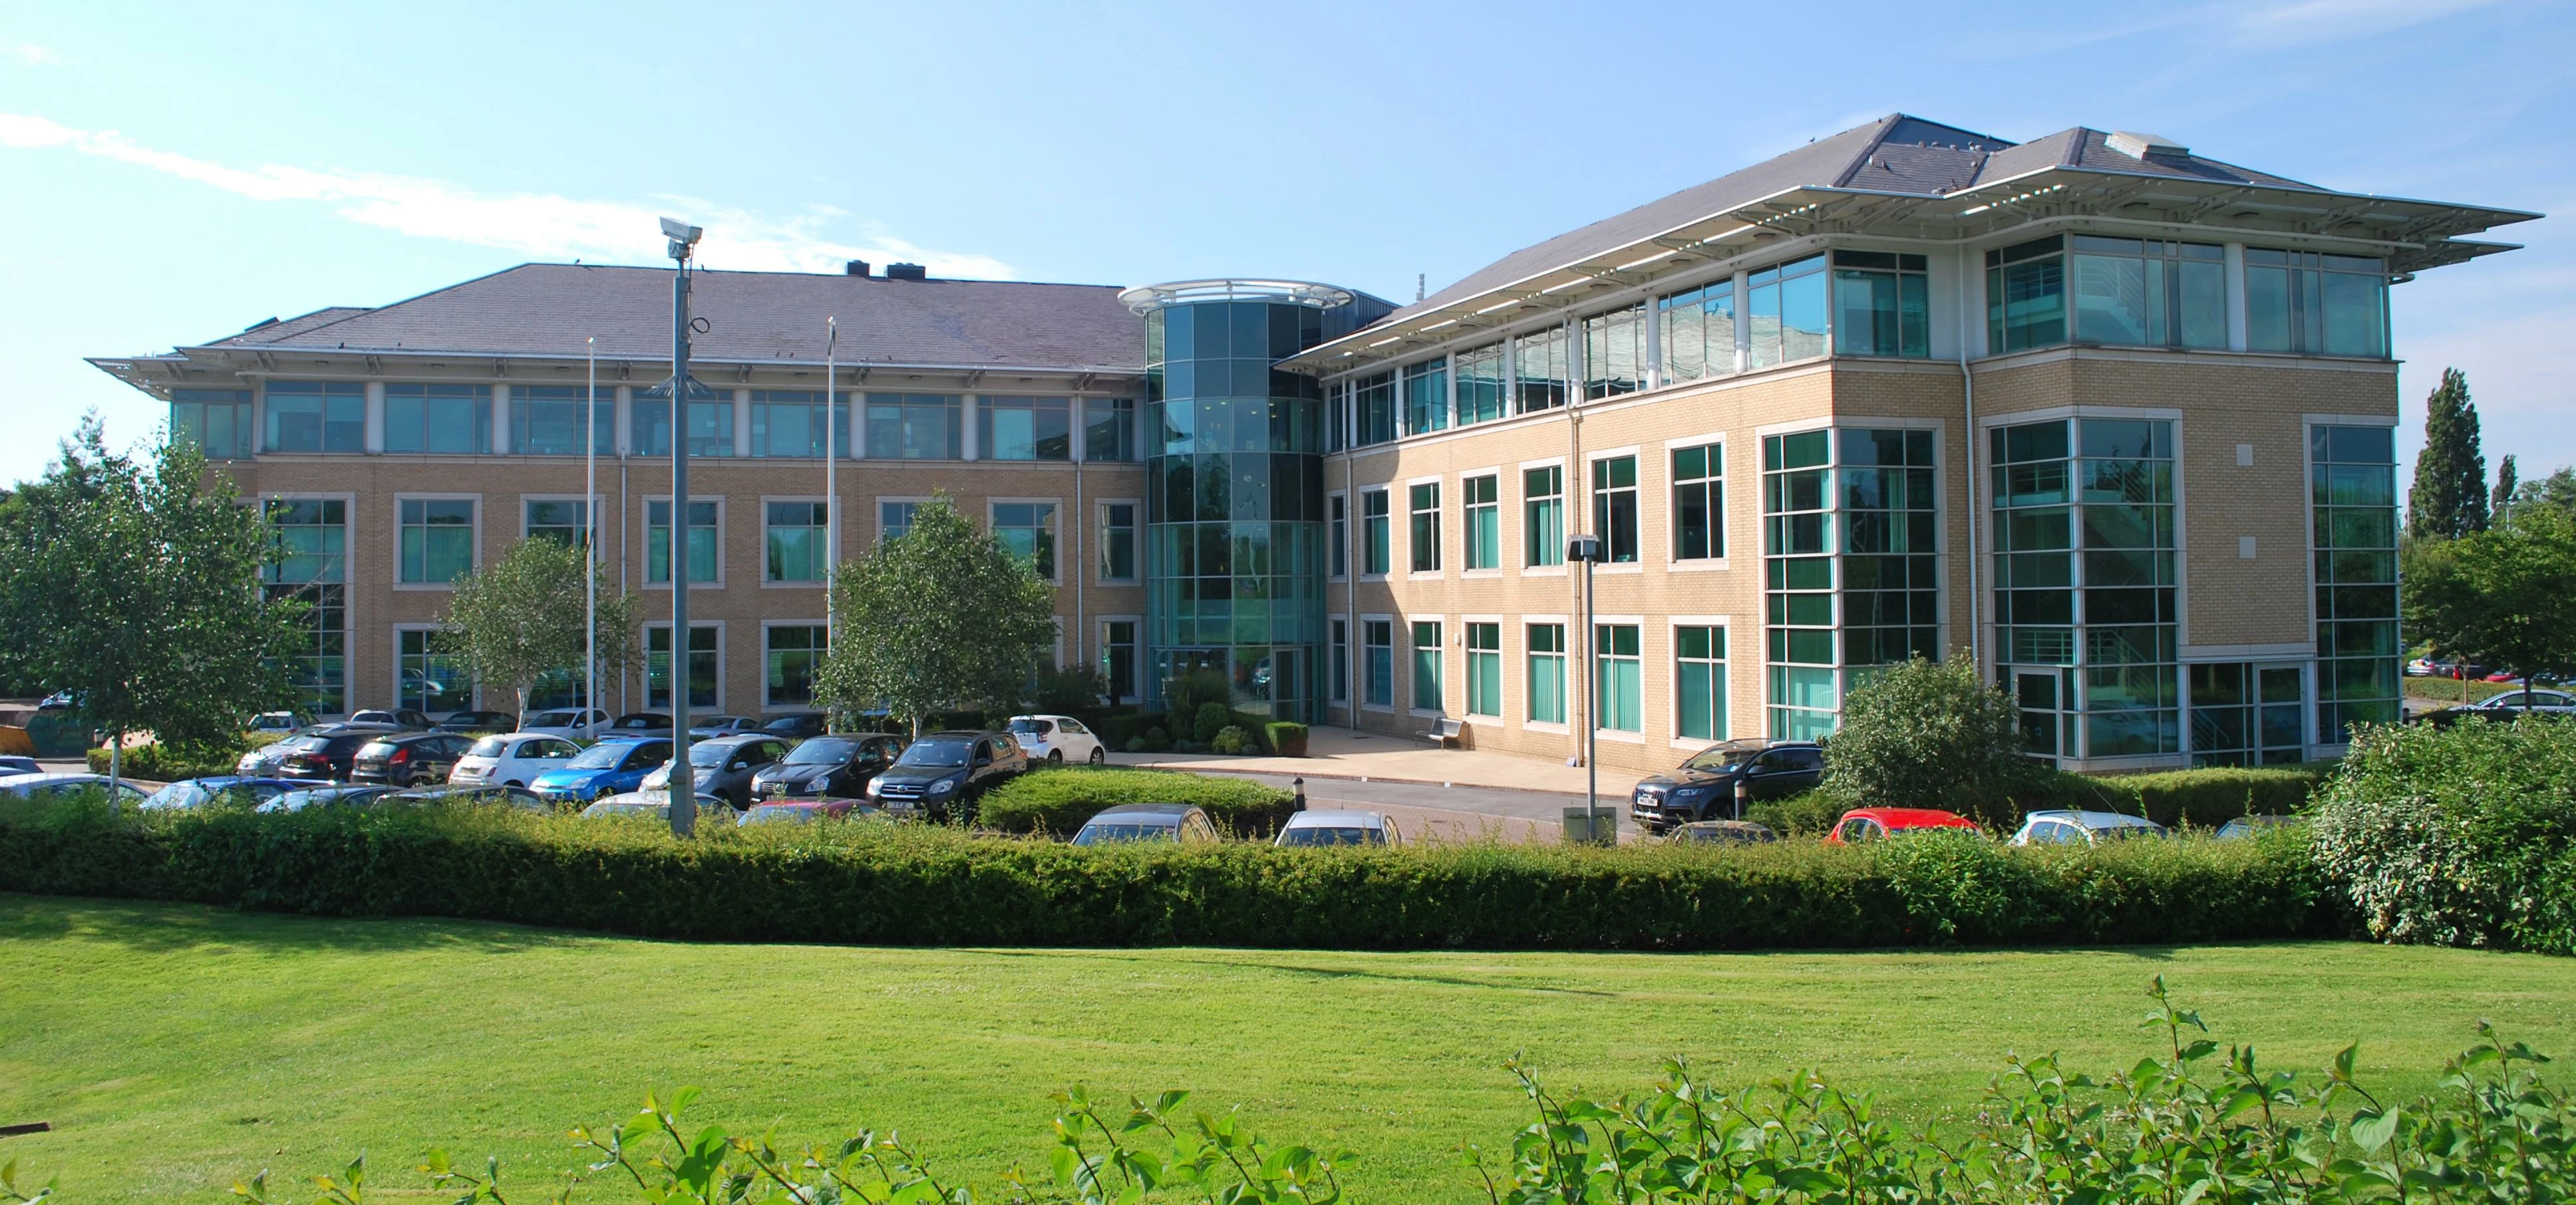 No.1 Lakeside, at Cheadle Royal Business Park, is now fully let